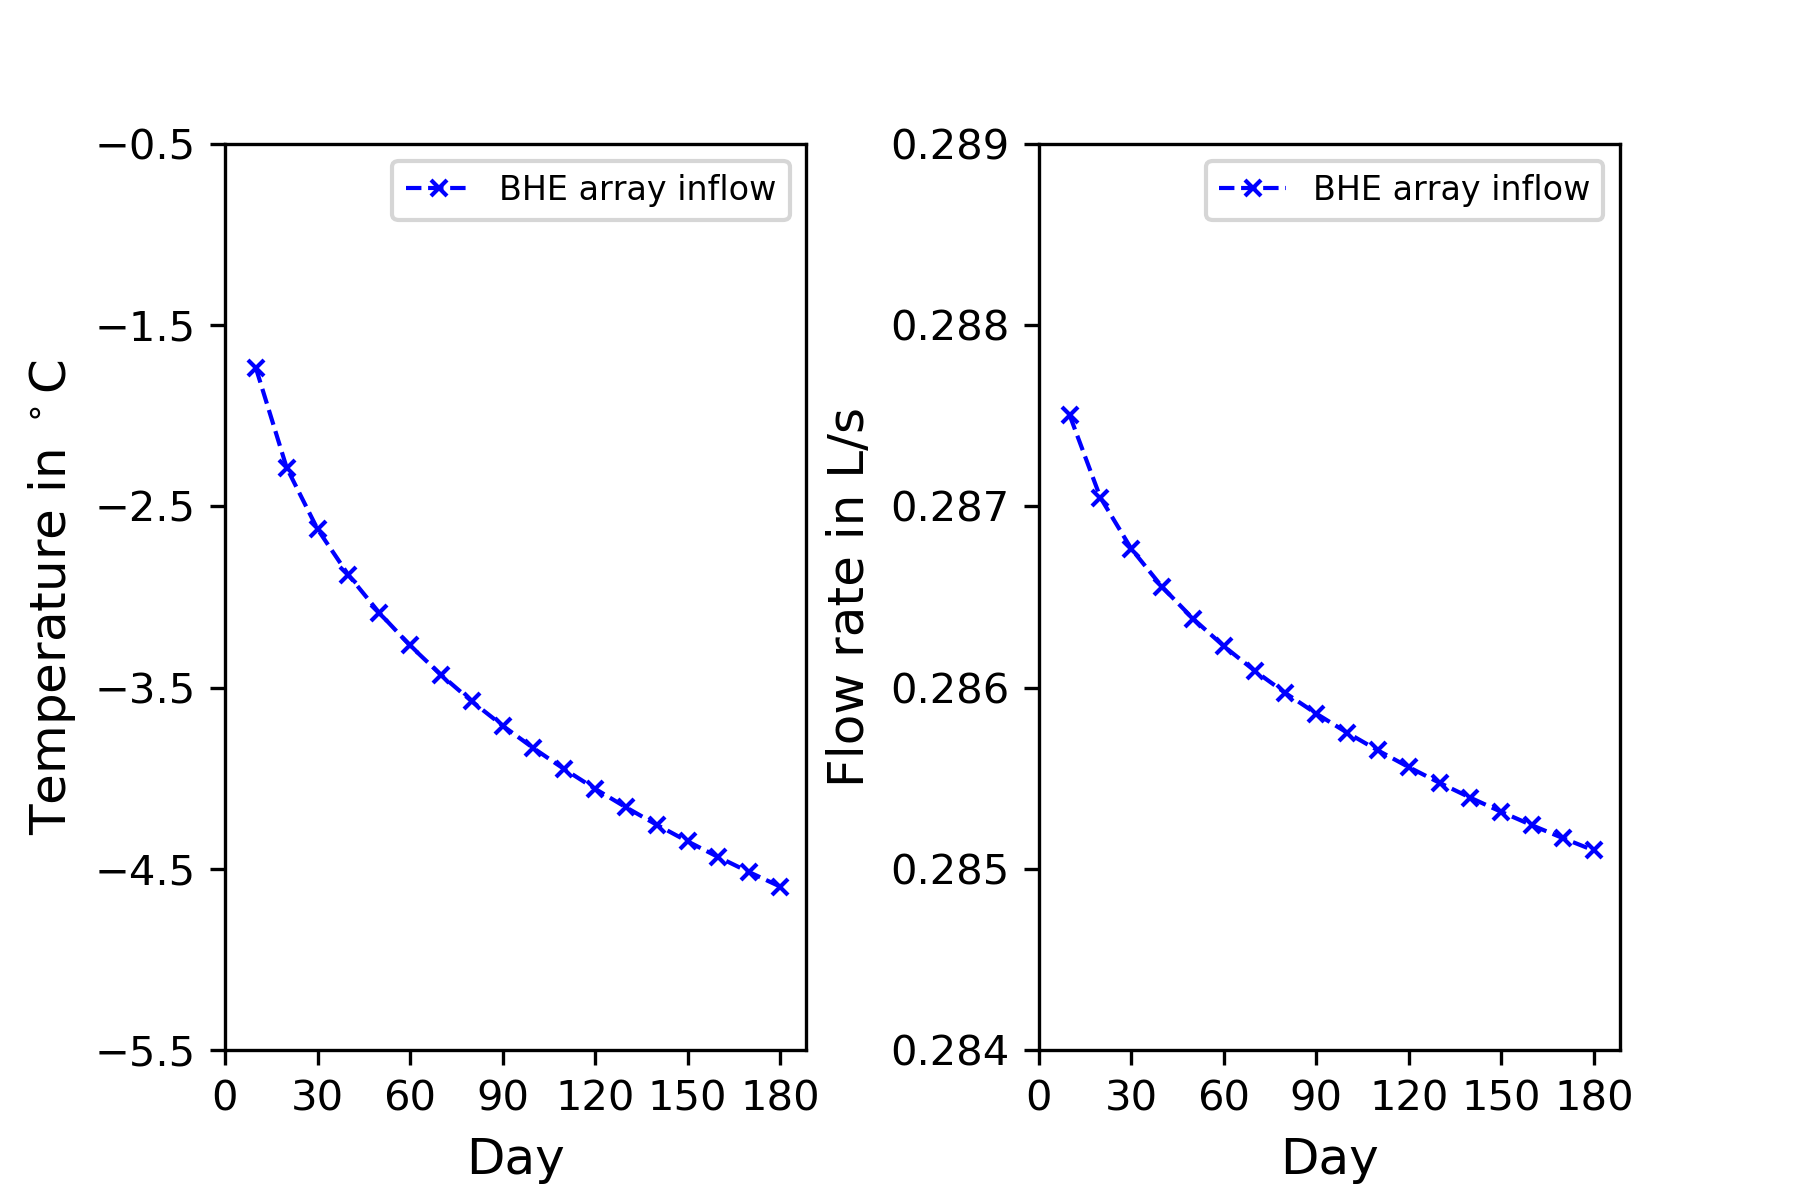 Evolution of the inflow refrigerant temperature and flow rate entering the BHE array